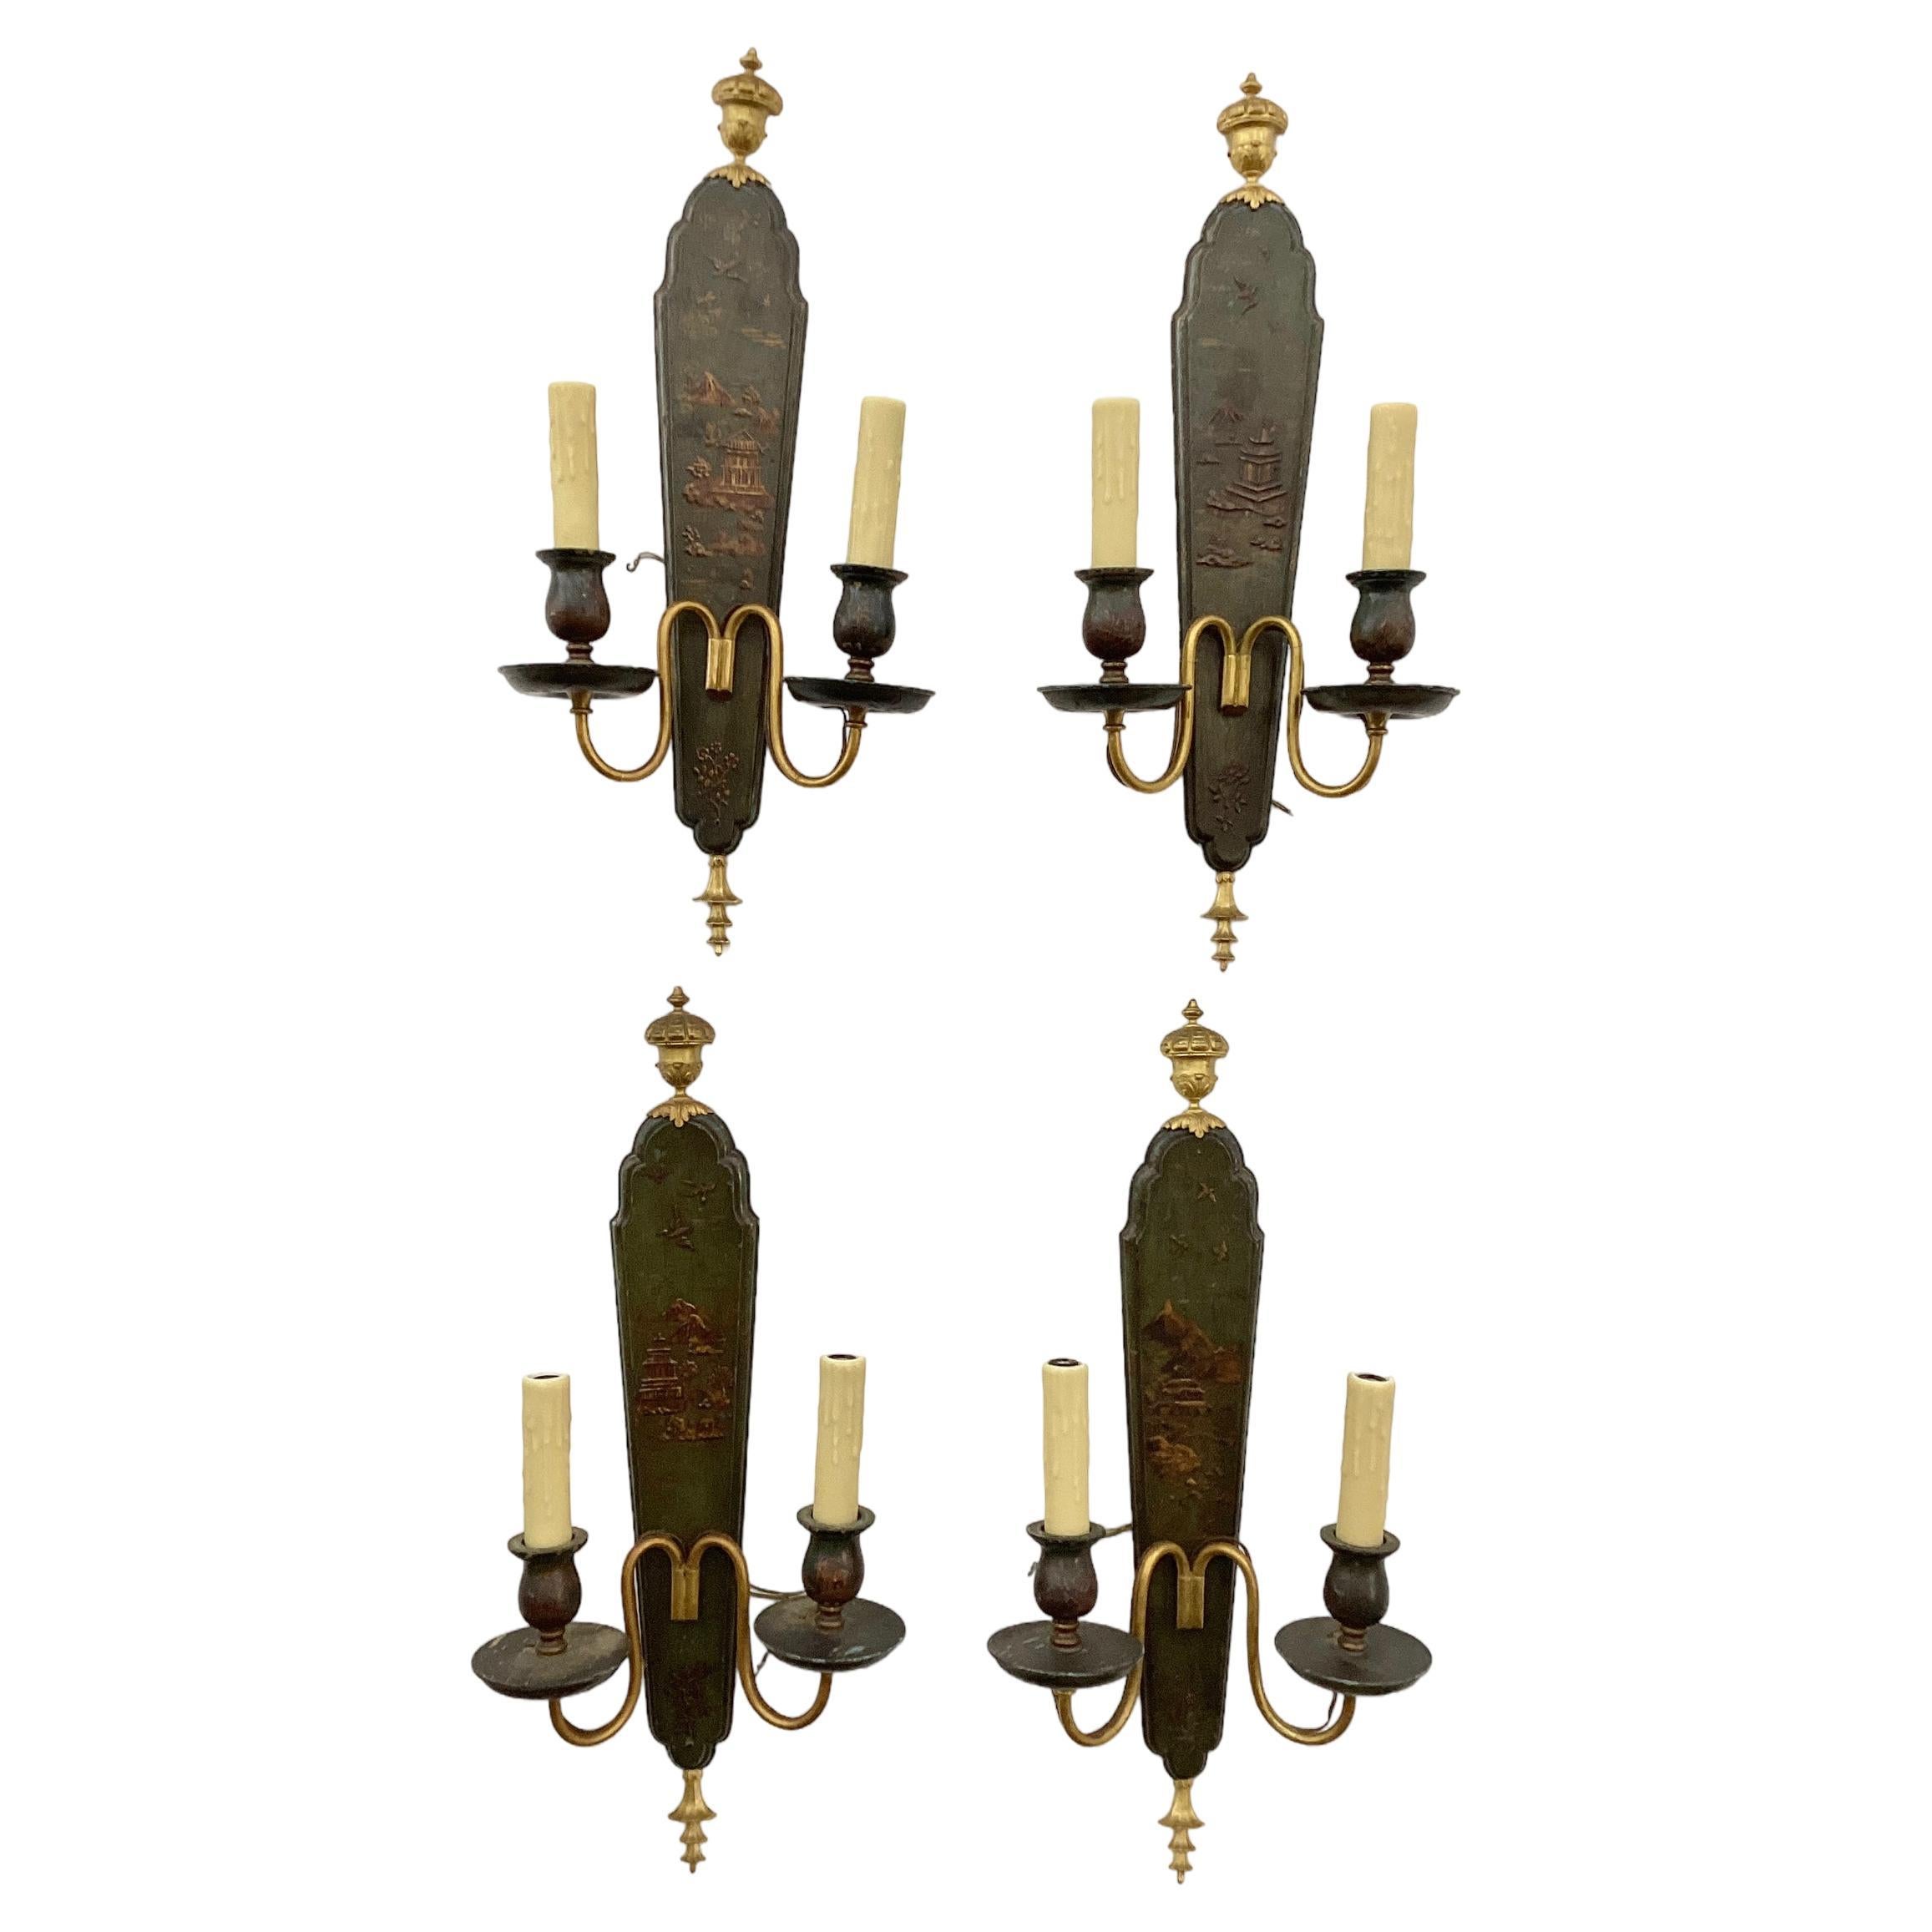 Set of Four English Chinoiserie Decorated Wall Sconces with Gilt Fittings